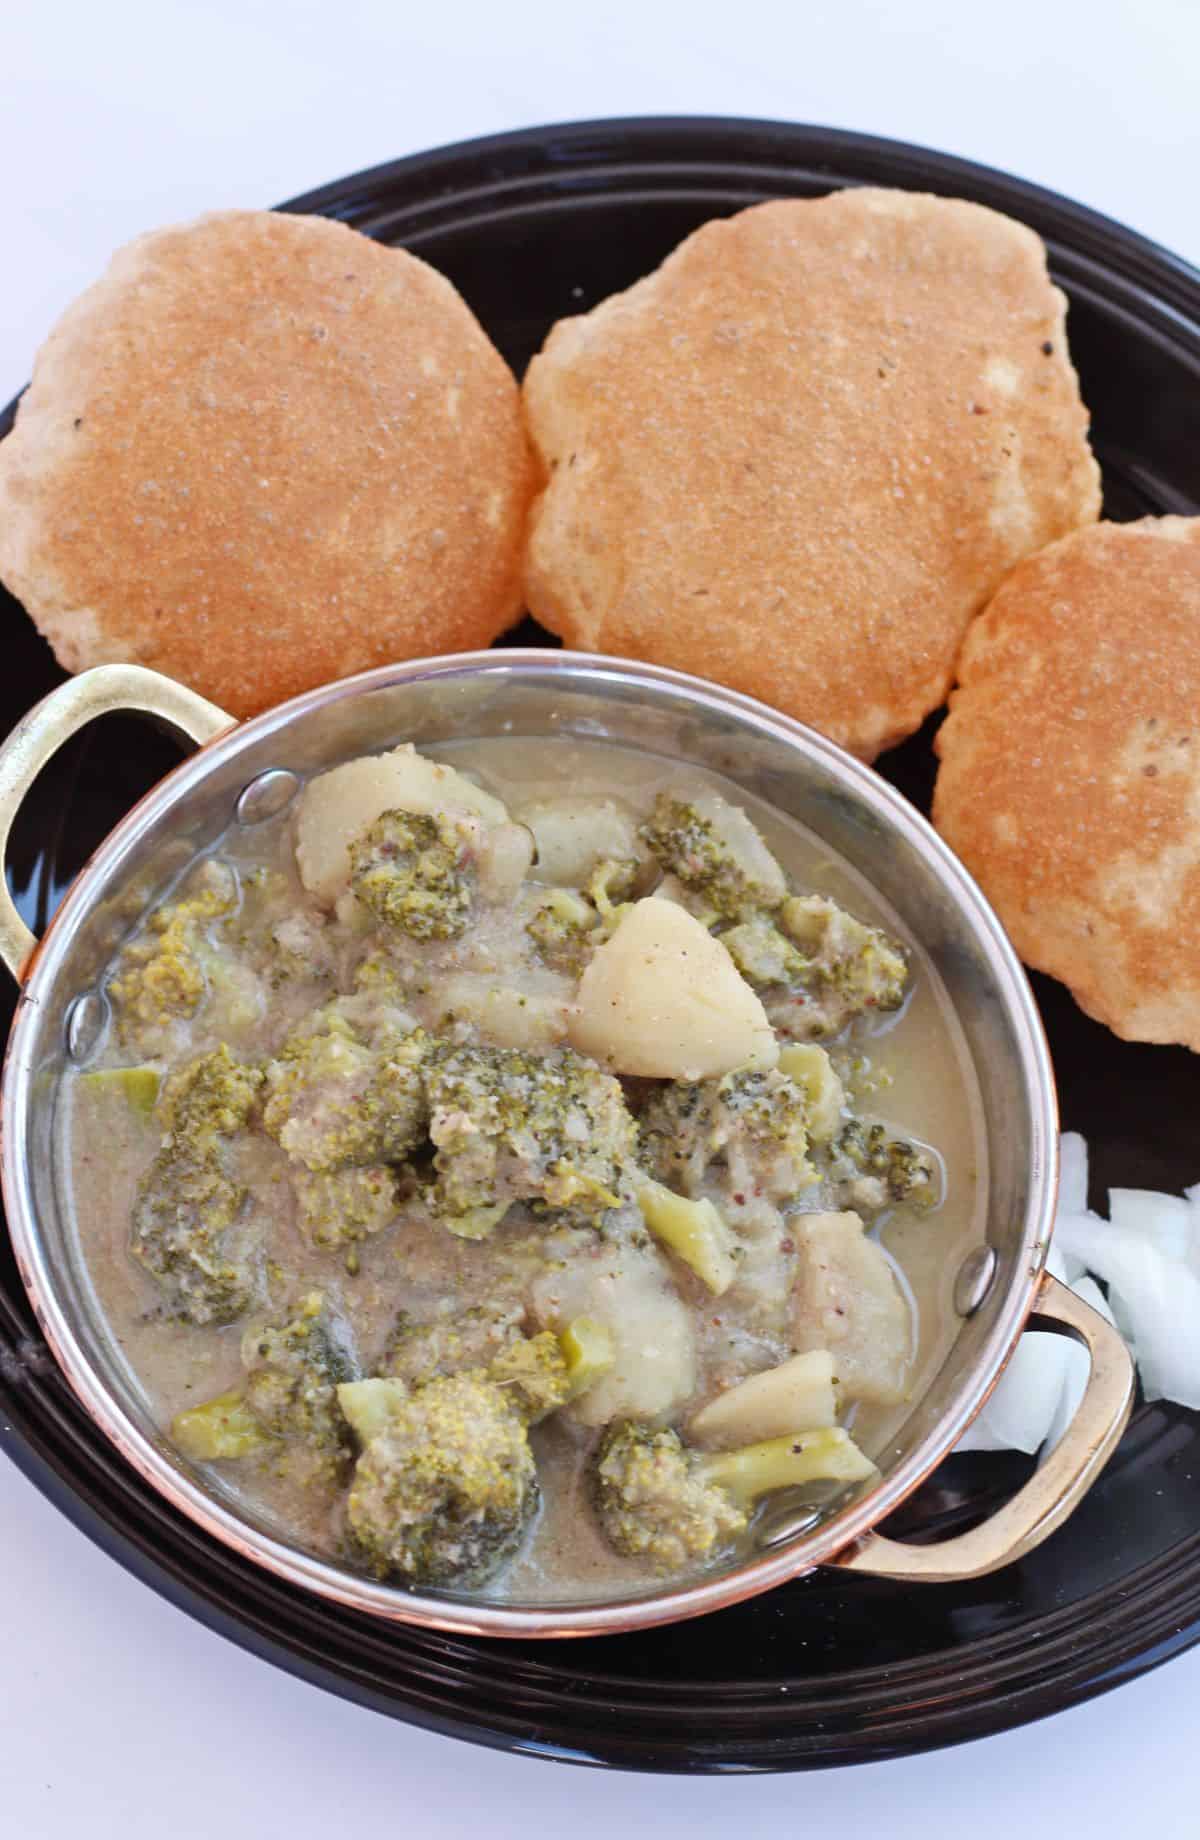 broccoli and potato in a curry with poori